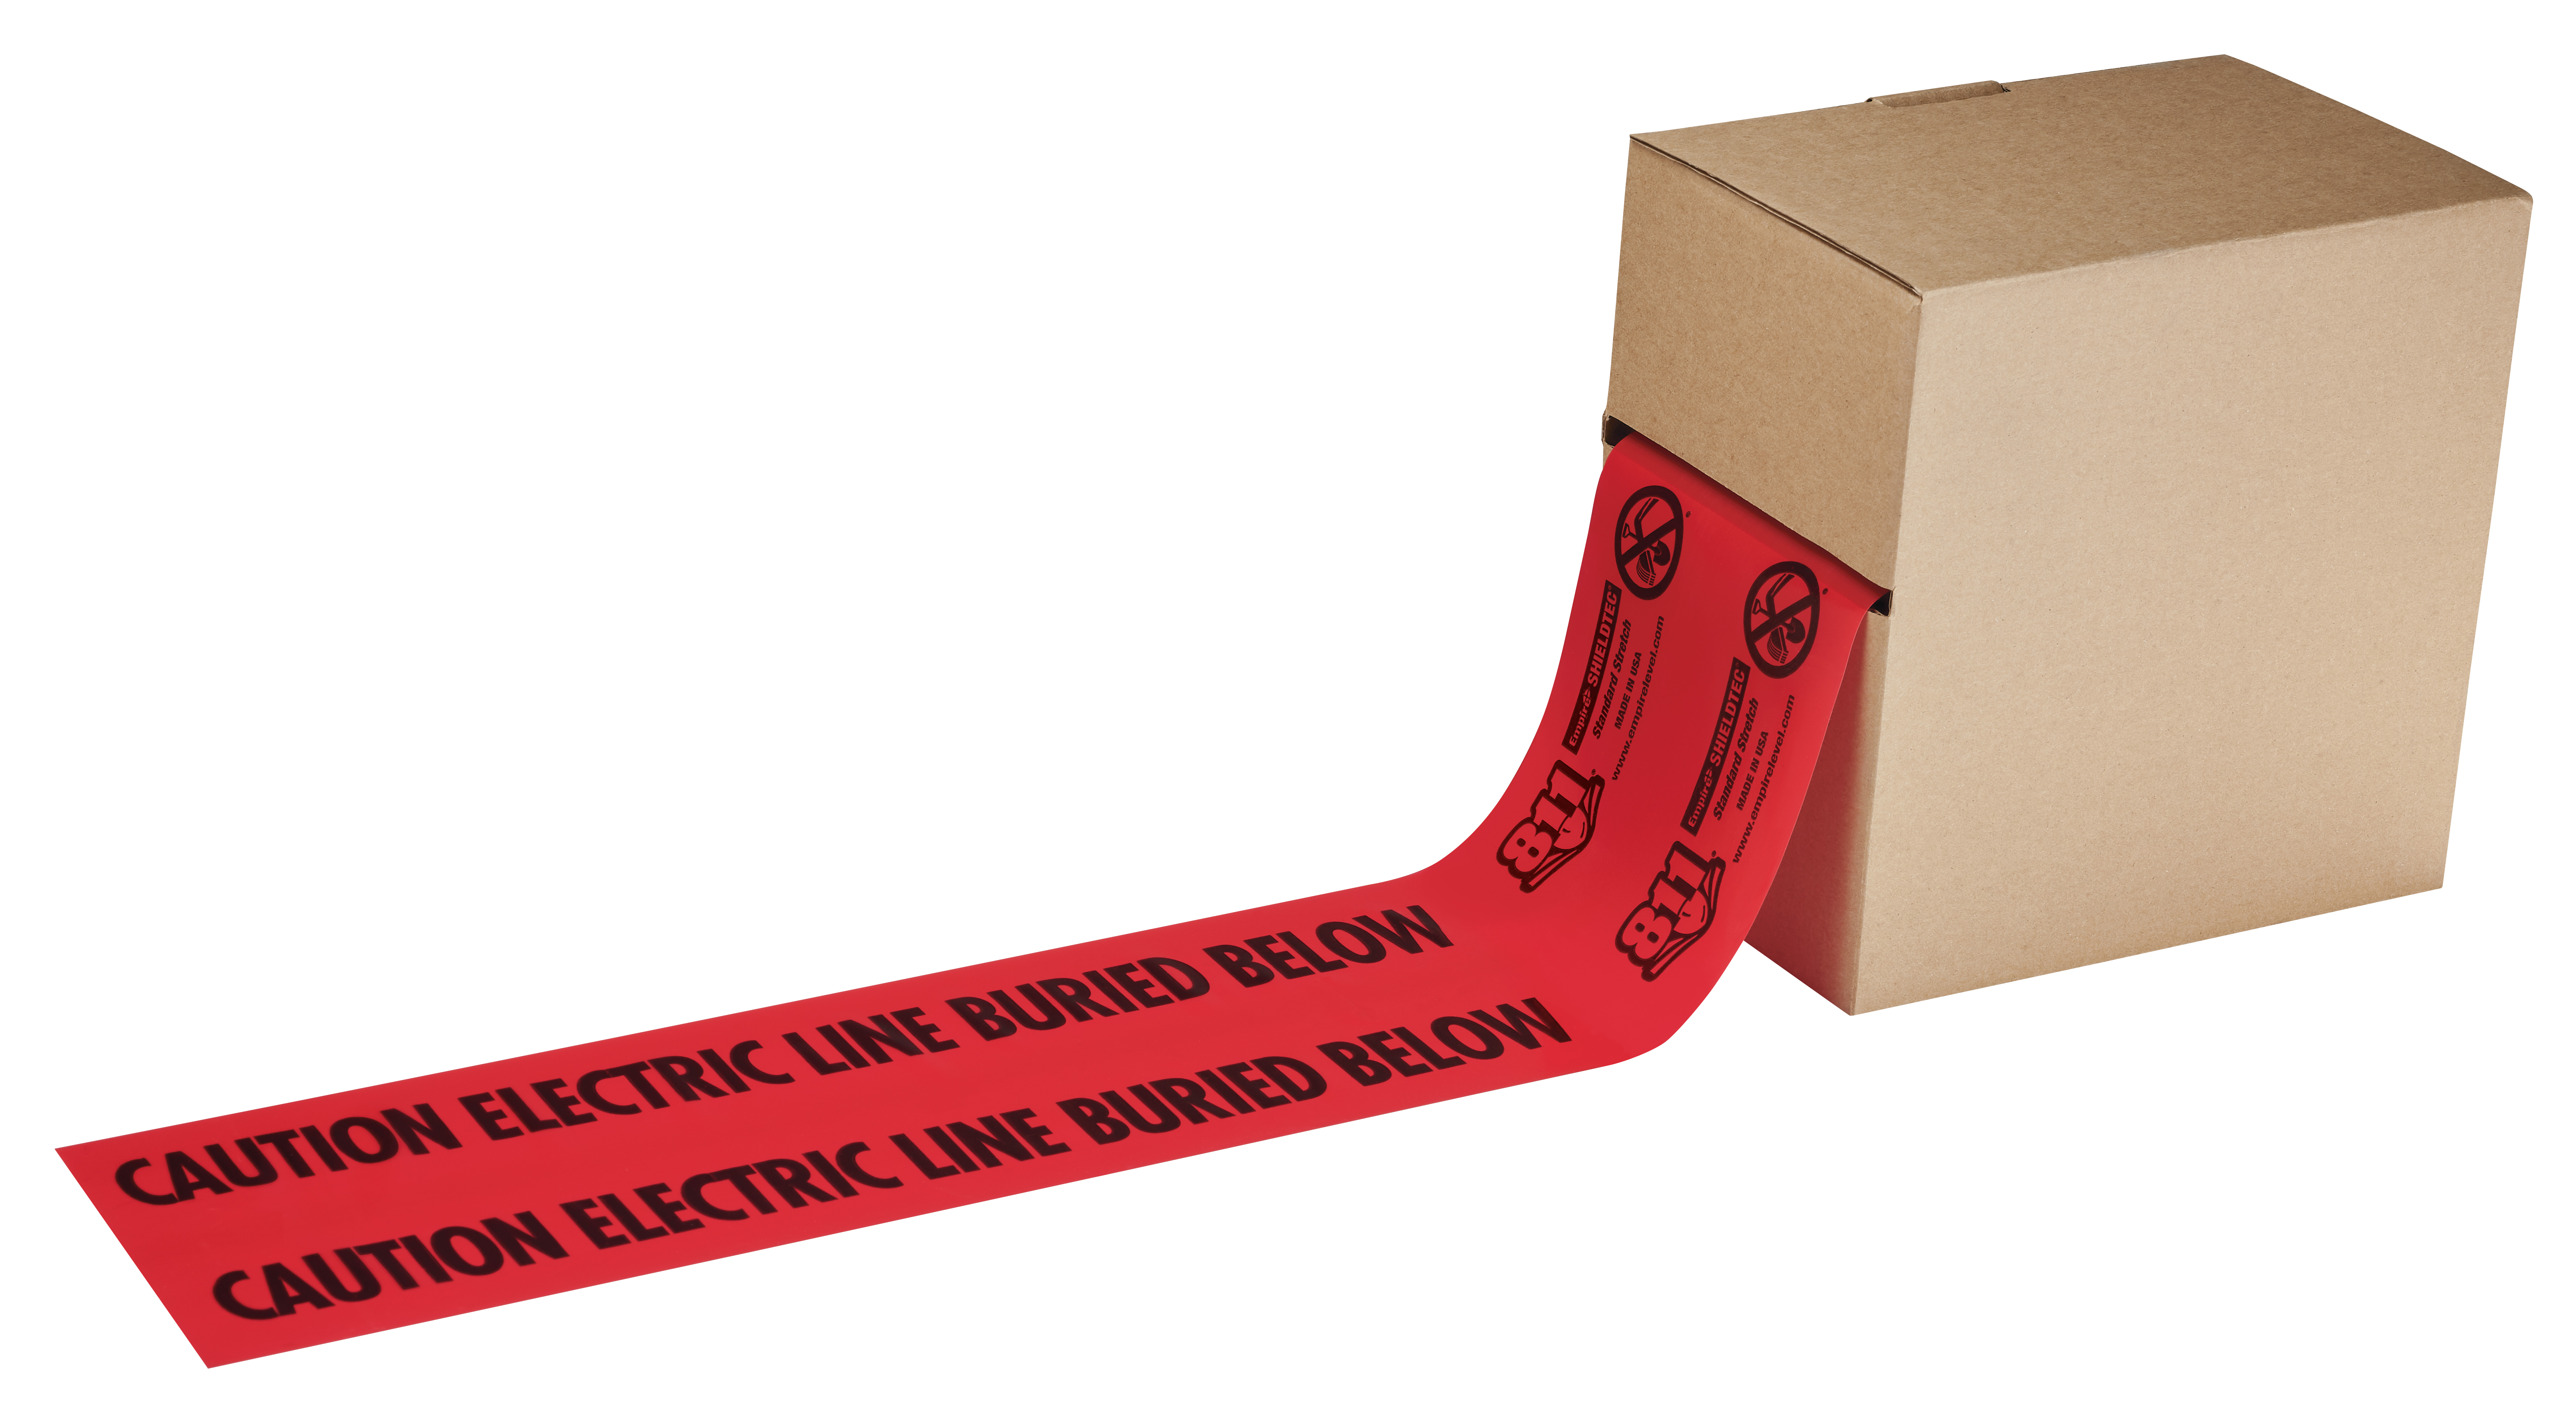 22-130DB 015812221390 The standard, non-detectable underground warning tape offers tough, basic protection. It is designed for open trench applications, and is proven in the marketplace for over 20 years.